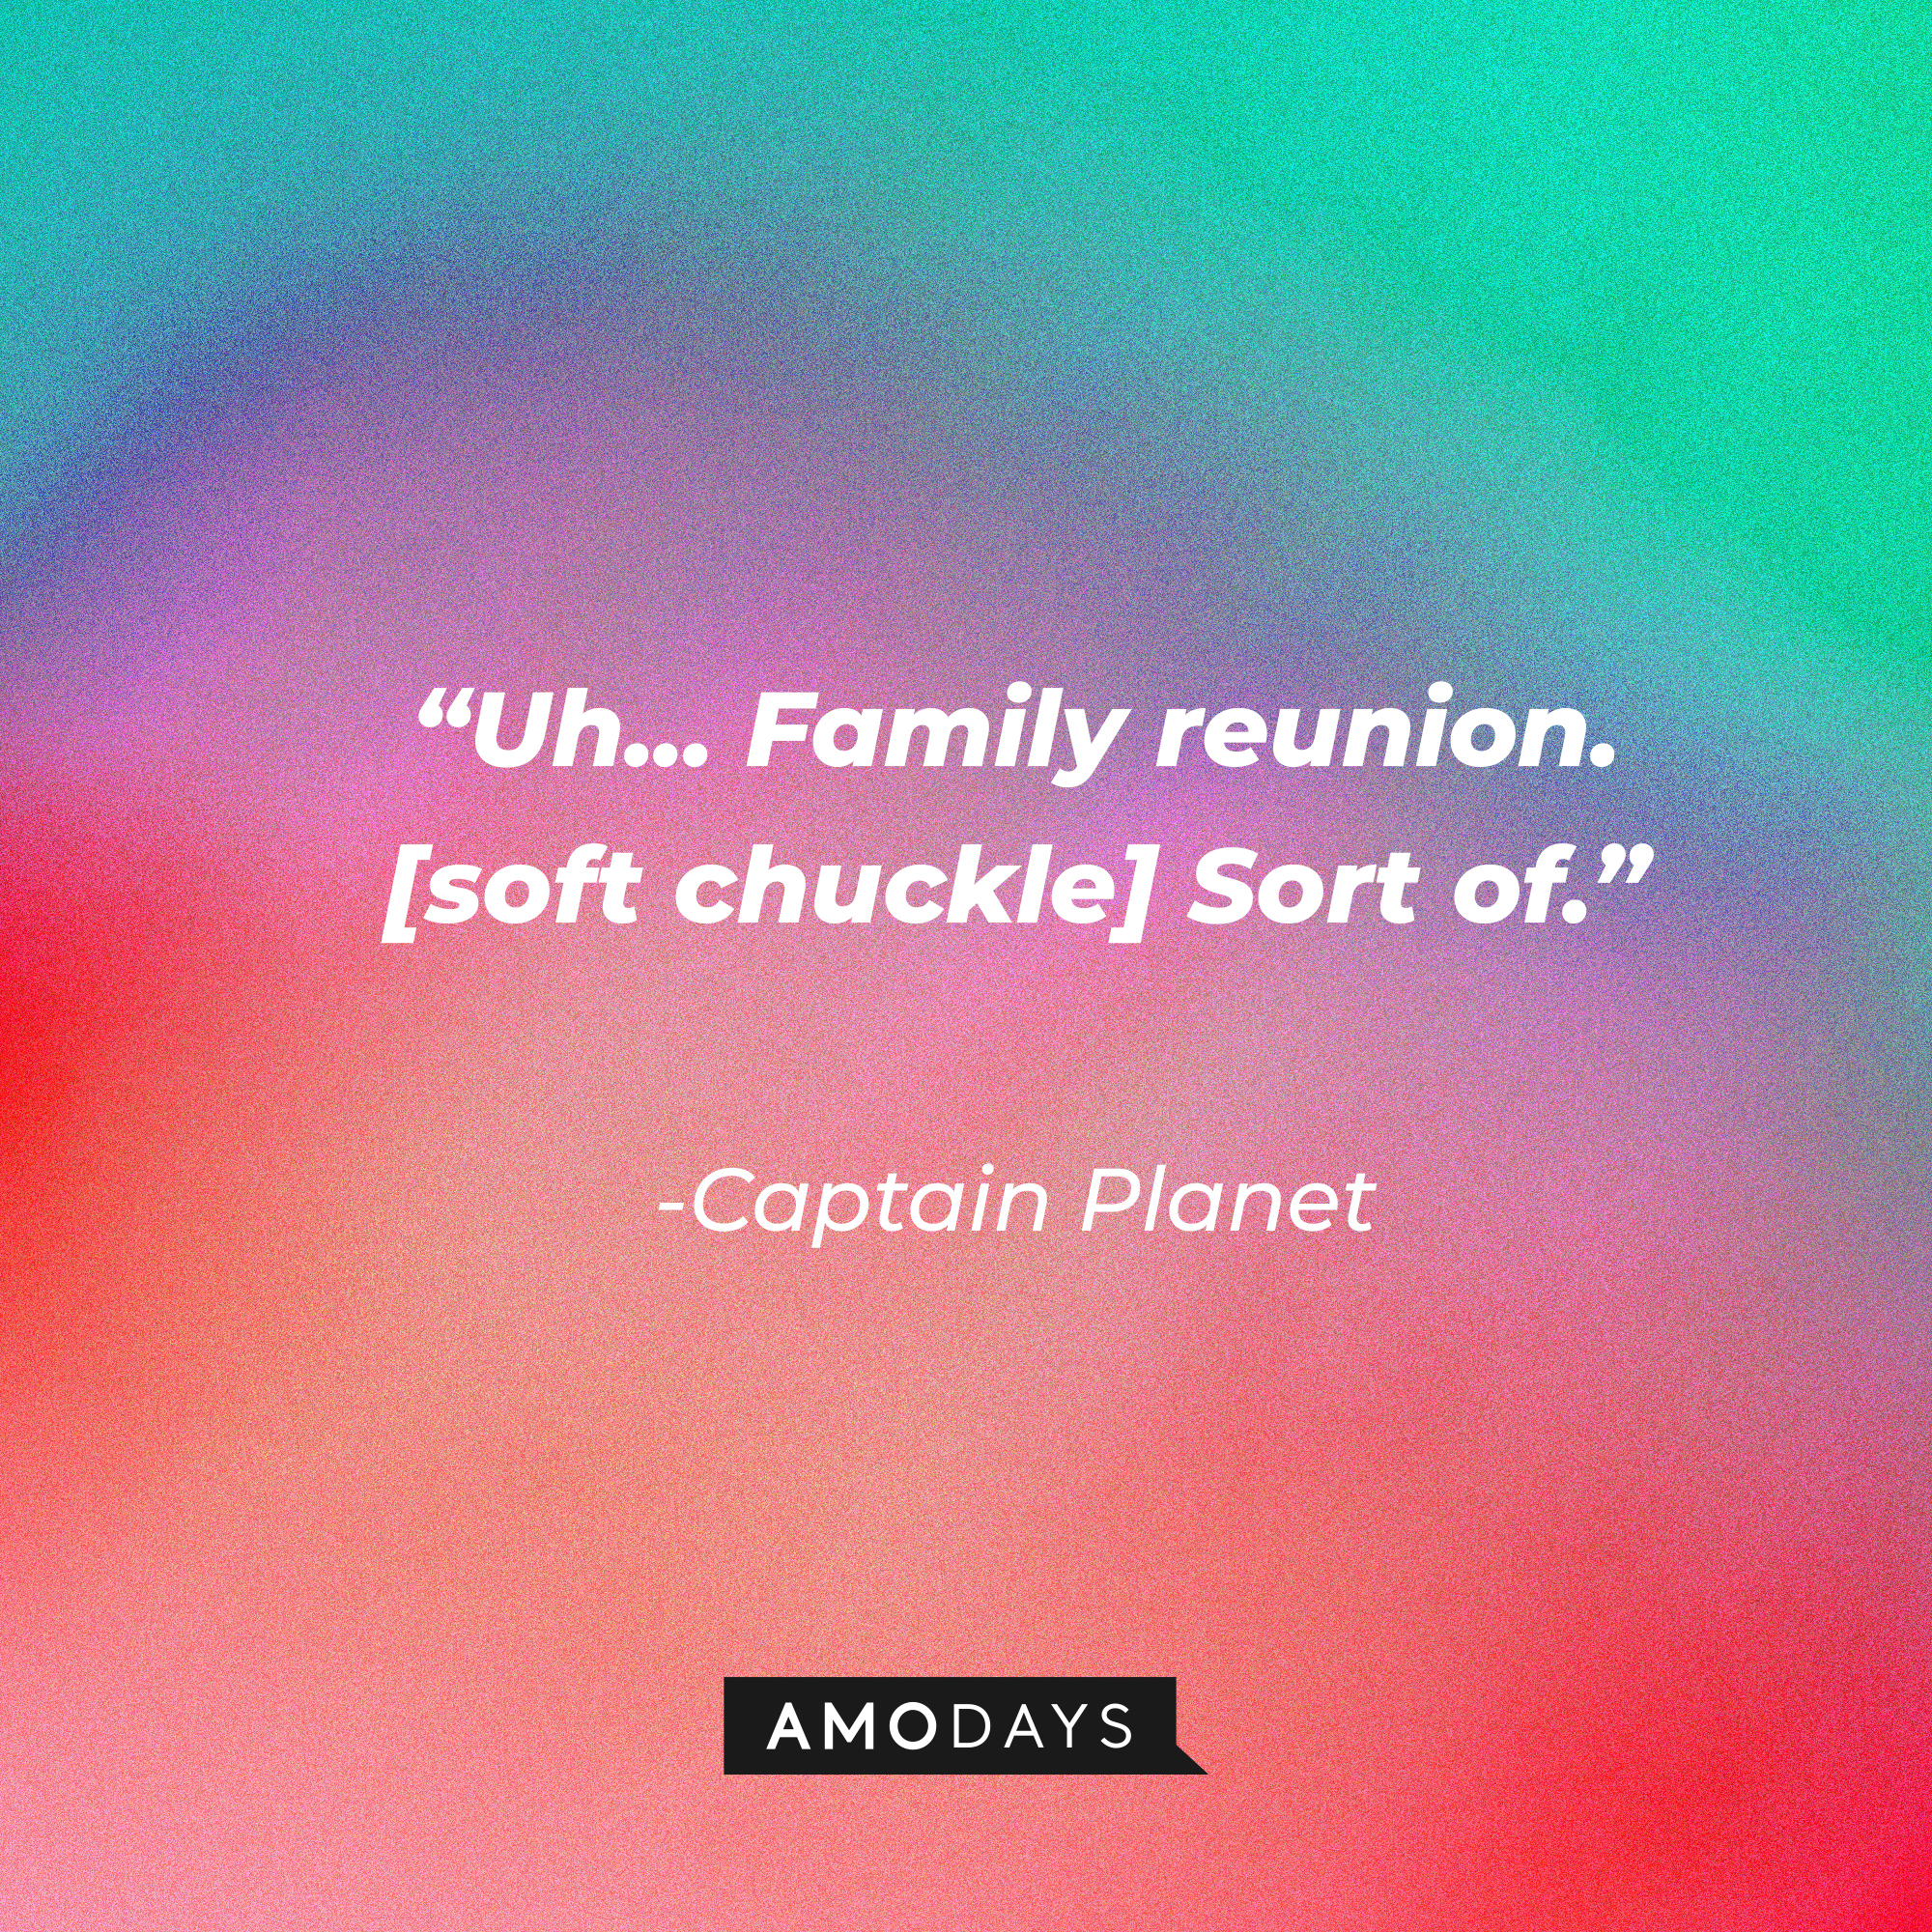 Captain Planet's quote: “Uh... Family reunion. [soft chuckle] Sort of.” | Source: Amodays